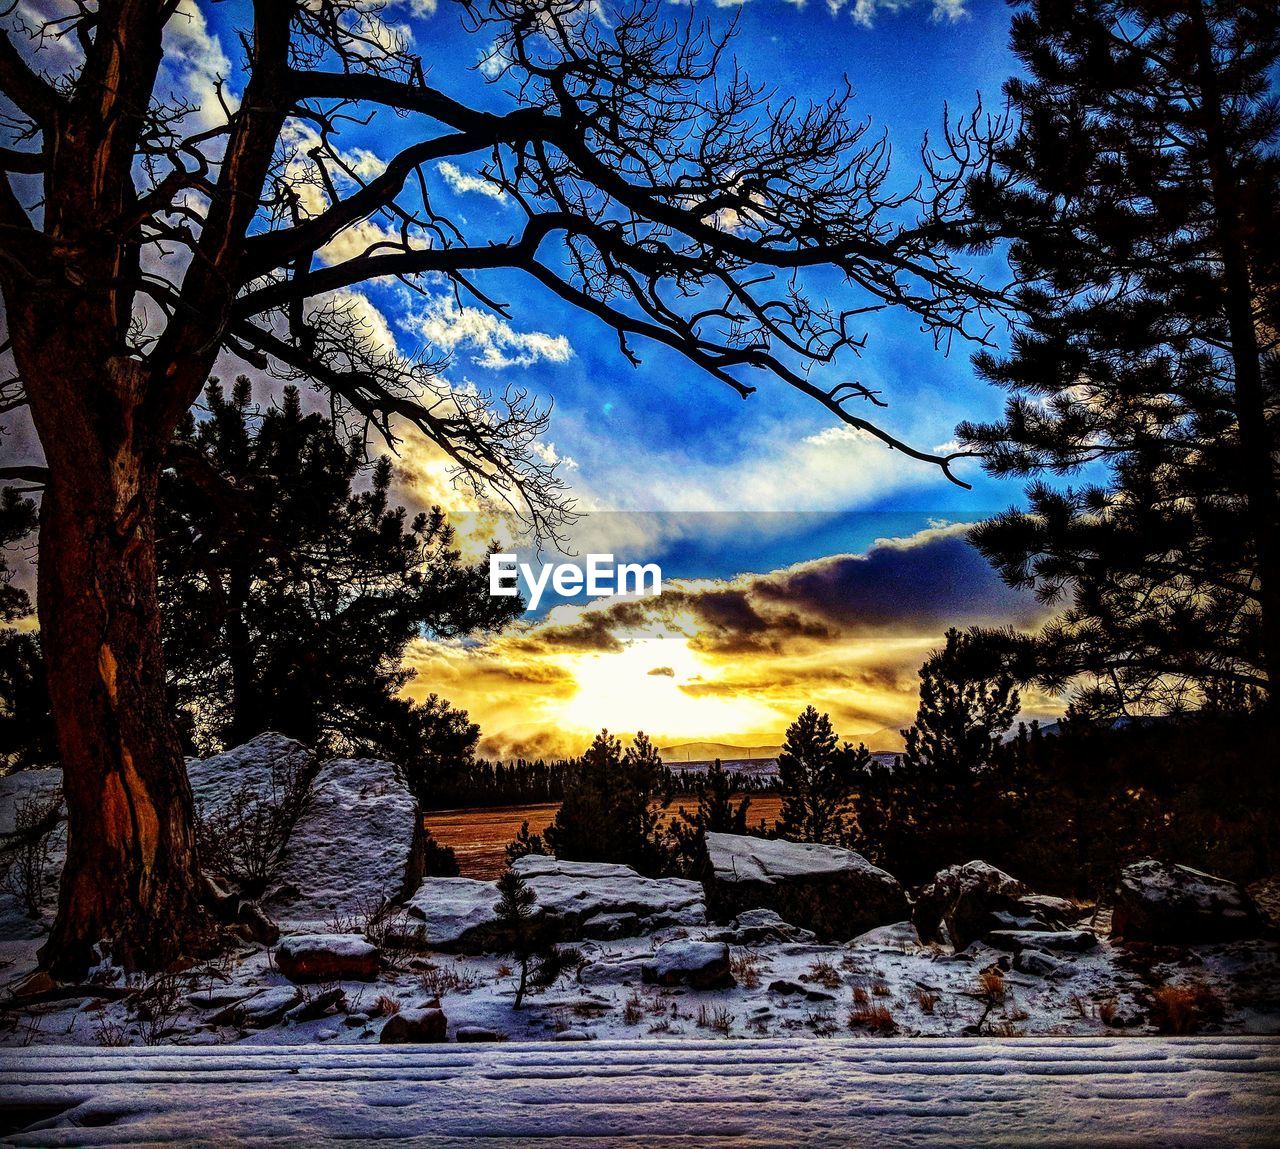 SCENIC VIEW OF SNOW COVERED LANDSCAPE AGAINST SKY